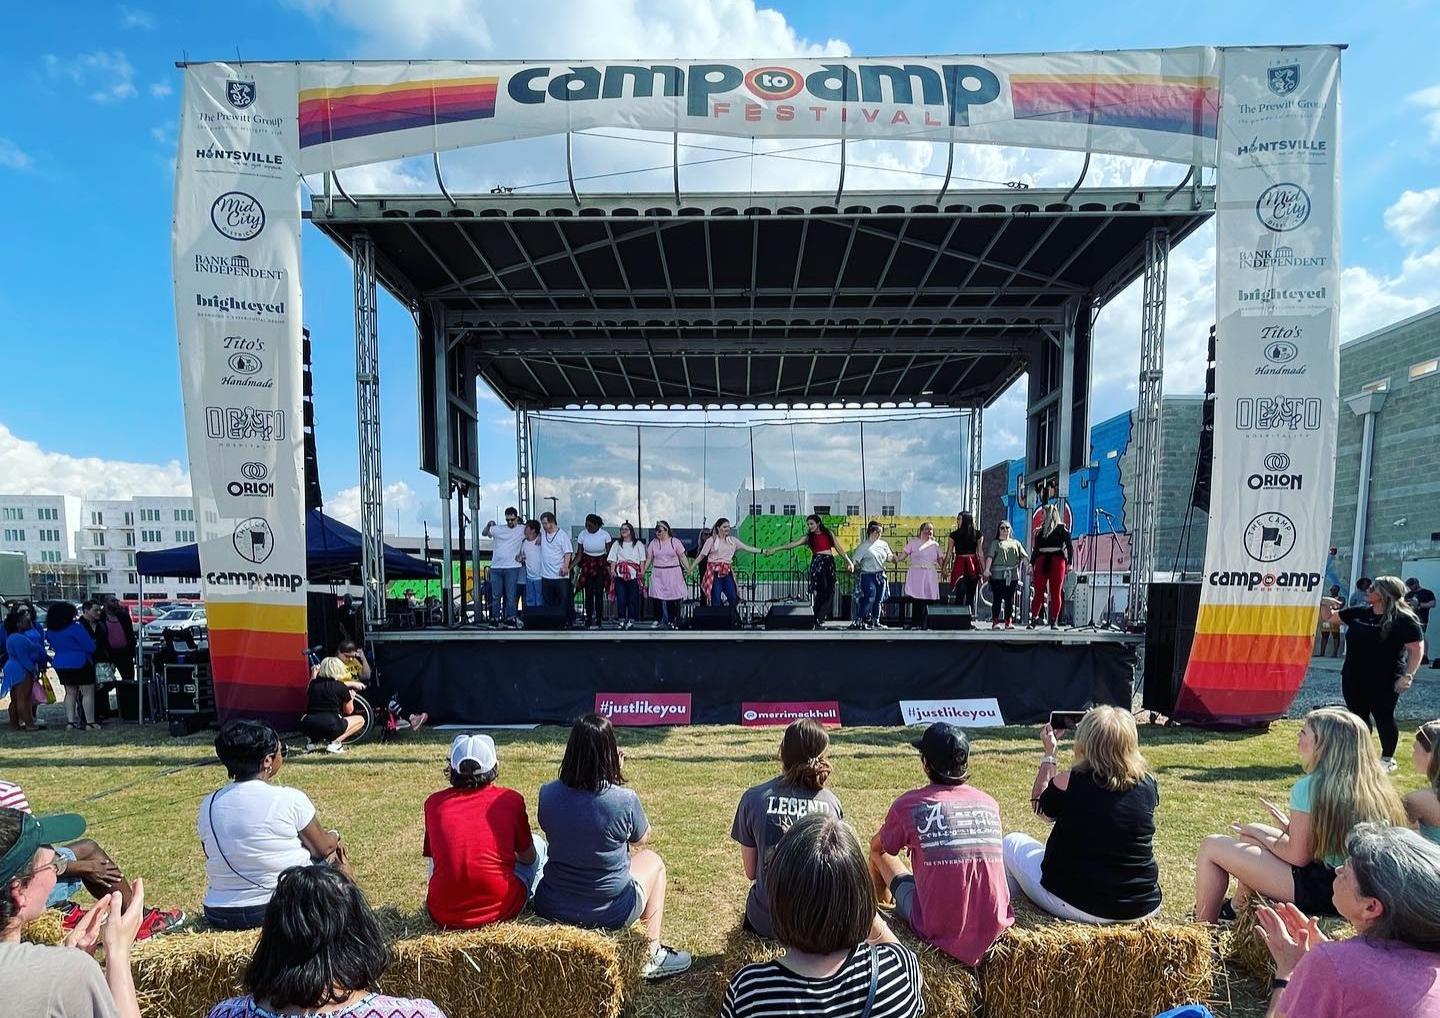 Pet Friendly Camp to Amp Festival